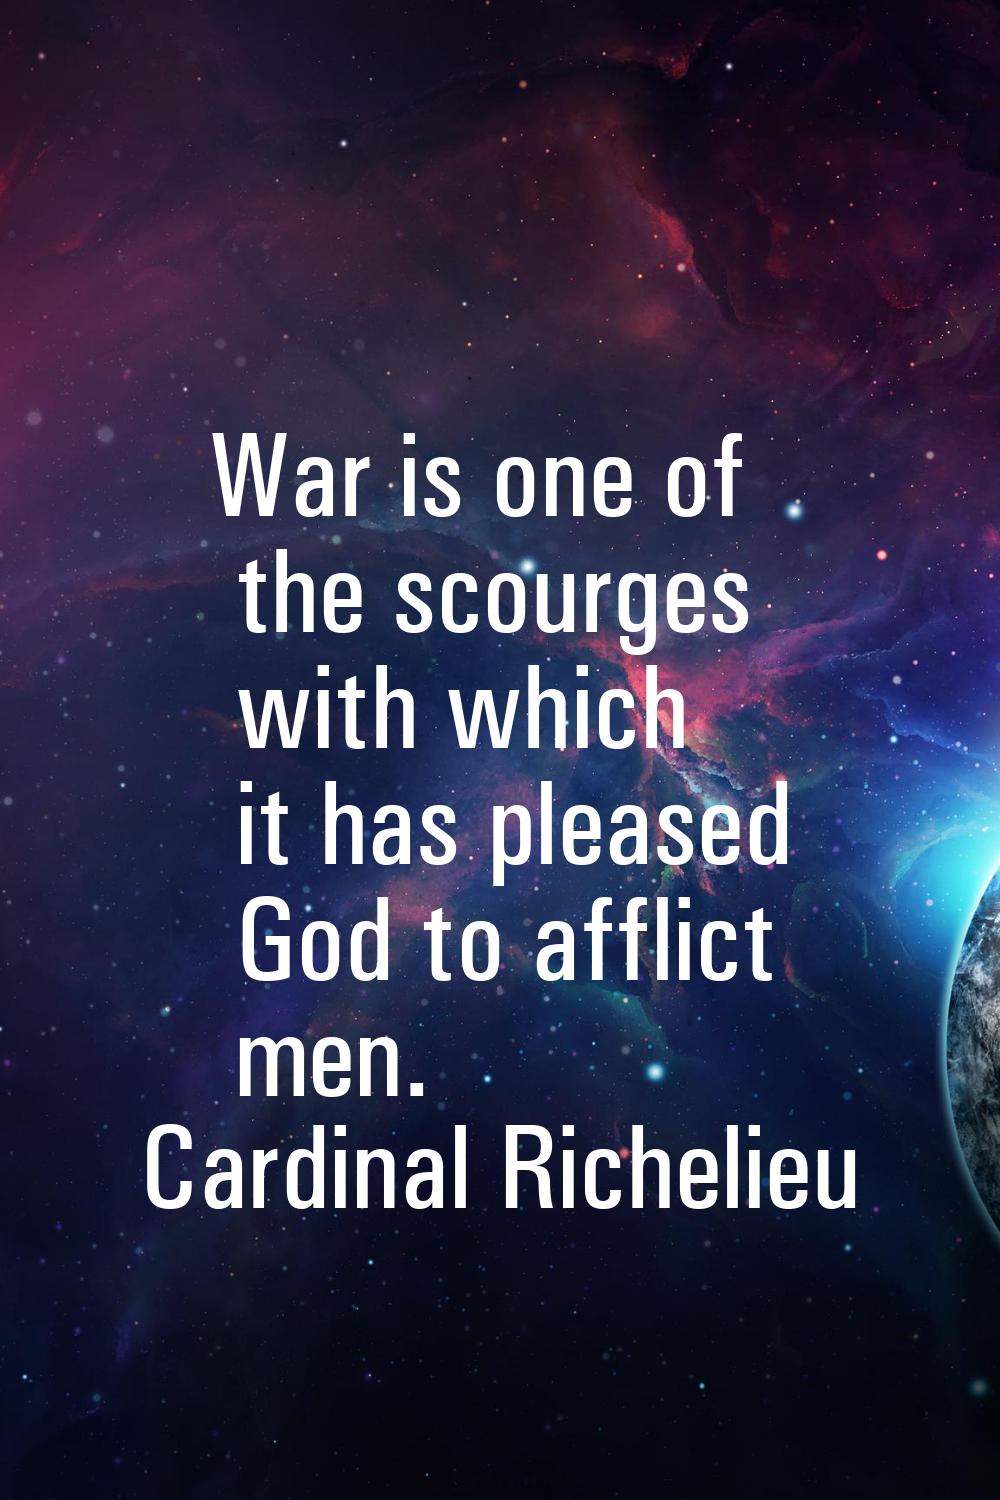 War is one of the scourges with which it has pleased God to afflict men.